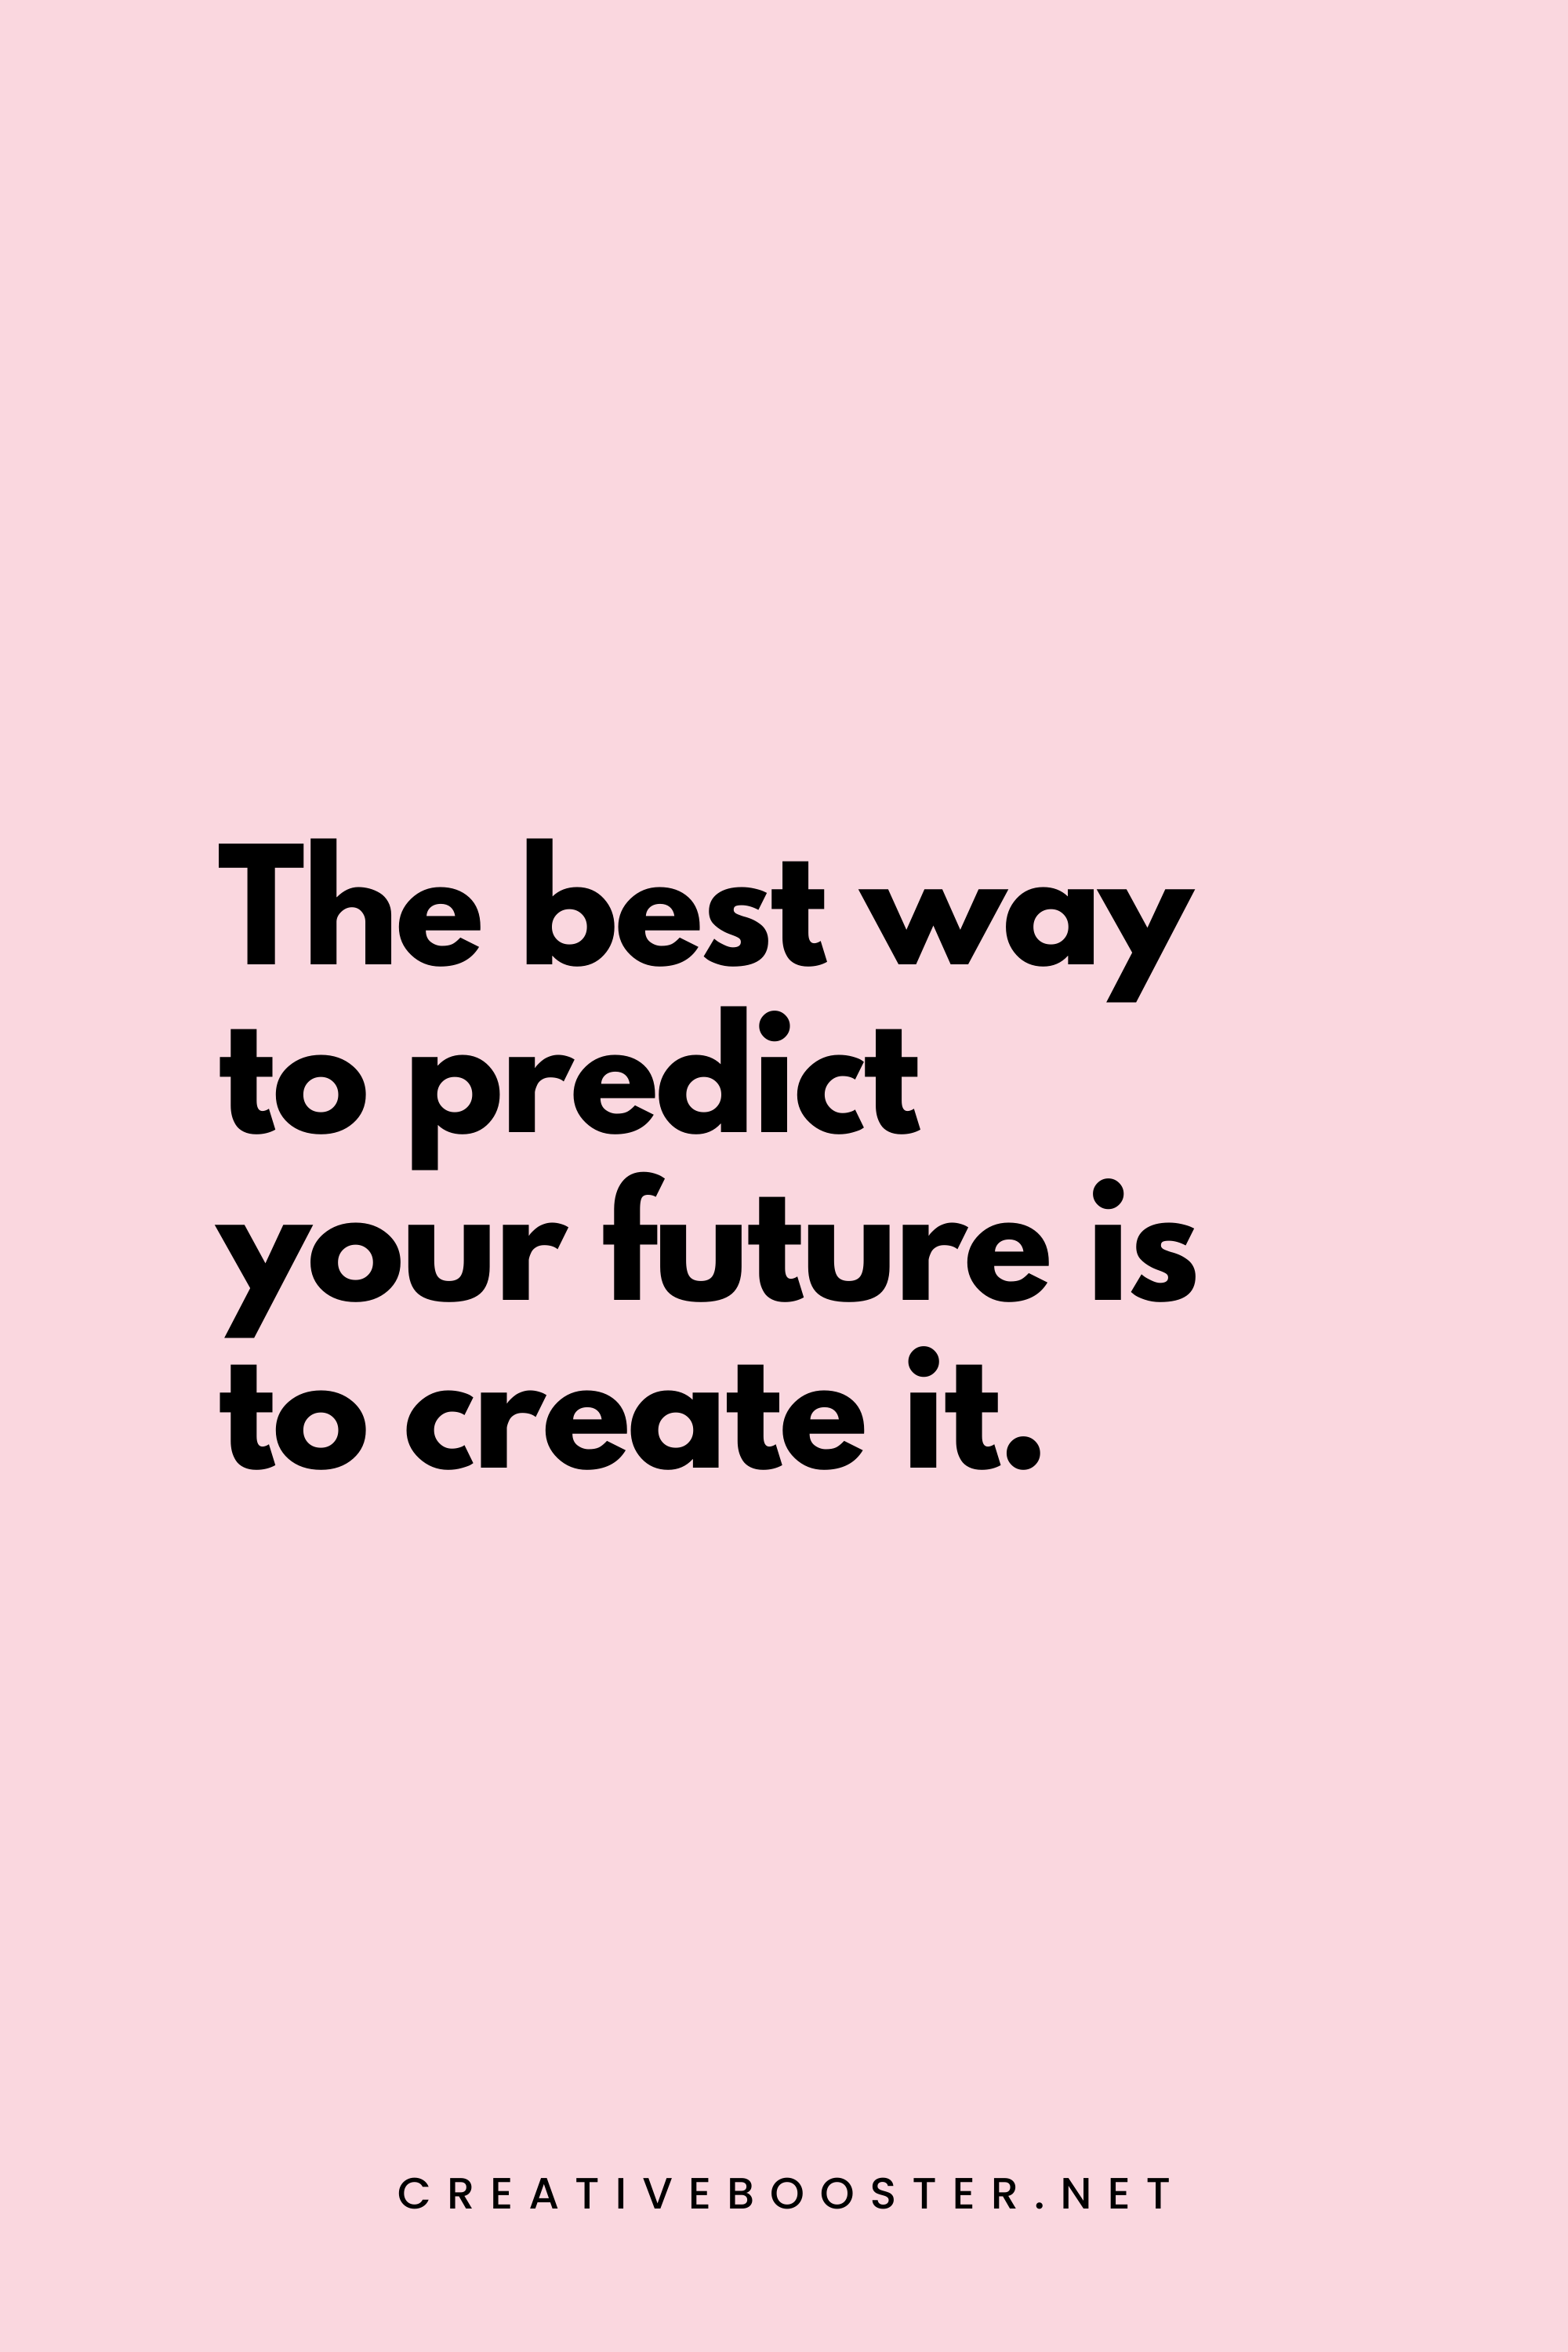 14. The best way to predict your future is to create it. - Abraham Lincoln - 1. Popular Financial Freedom Quotes